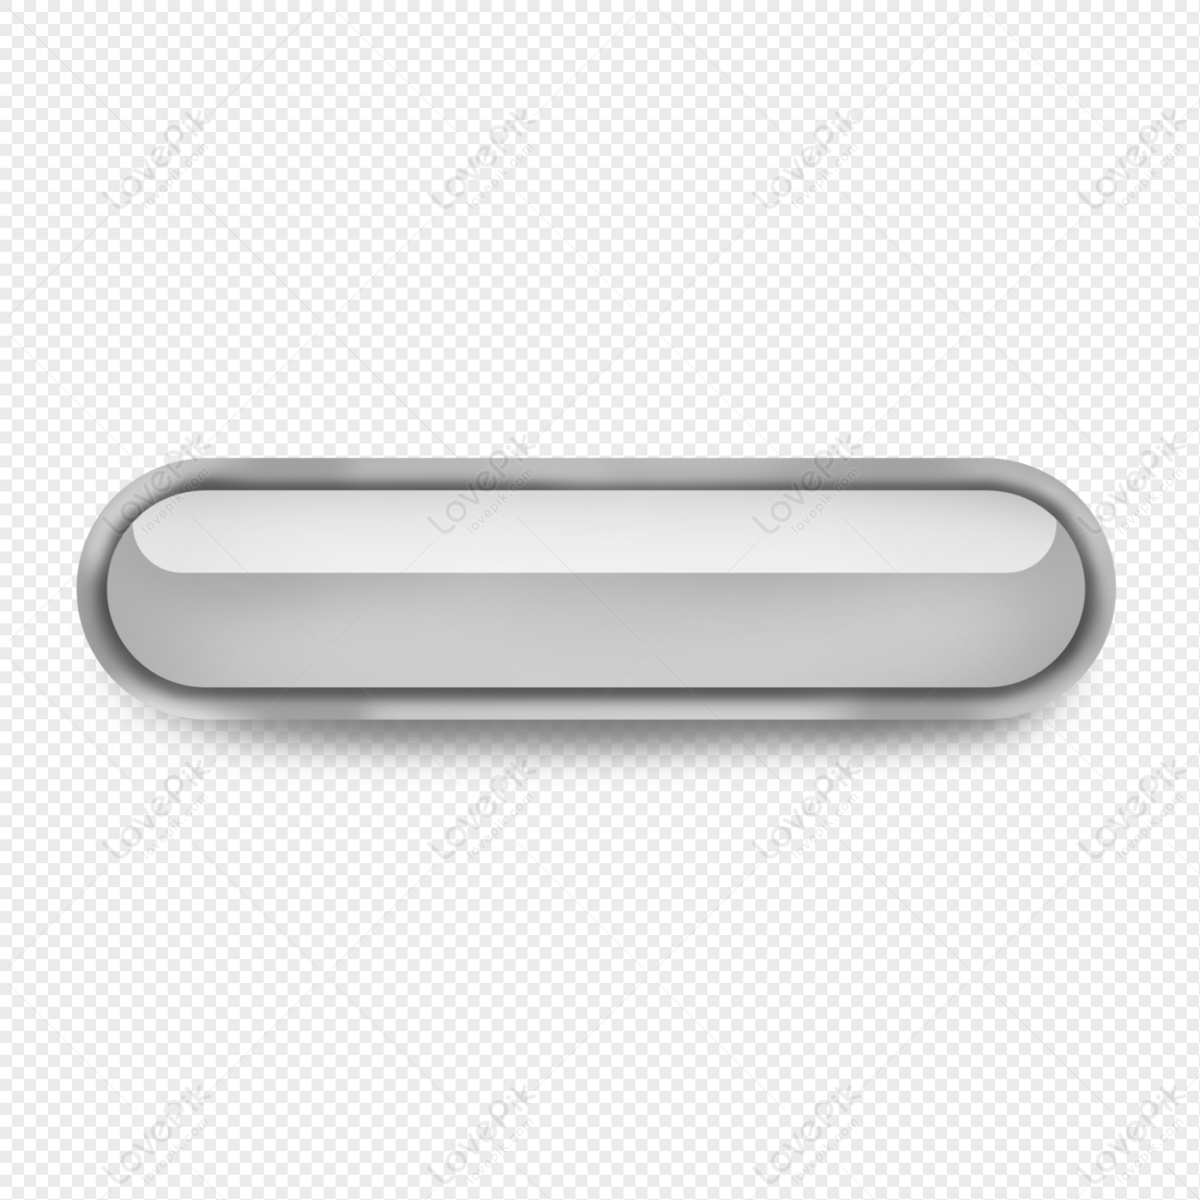 Silver Colored Phone Contact, Contact Us, Phone Number Box, Silver PNG  Transparent Clipart Image and PSD File for Free Download